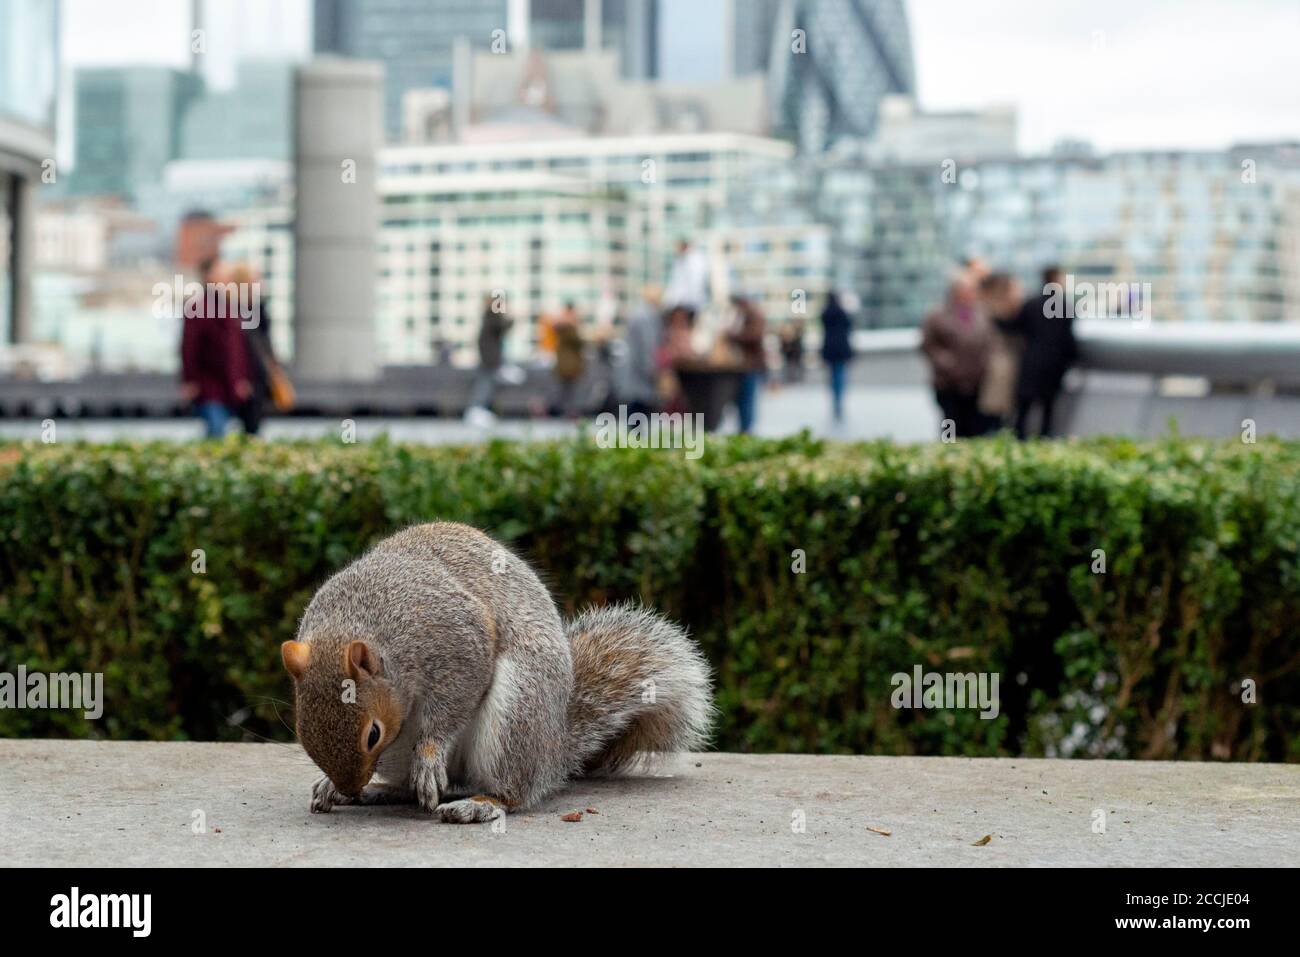 Eastern Grey Squirrel or Sciurus carolinensis in urban environment seen by the City Hall as Anthropogenic effect in London UK Stock Photo